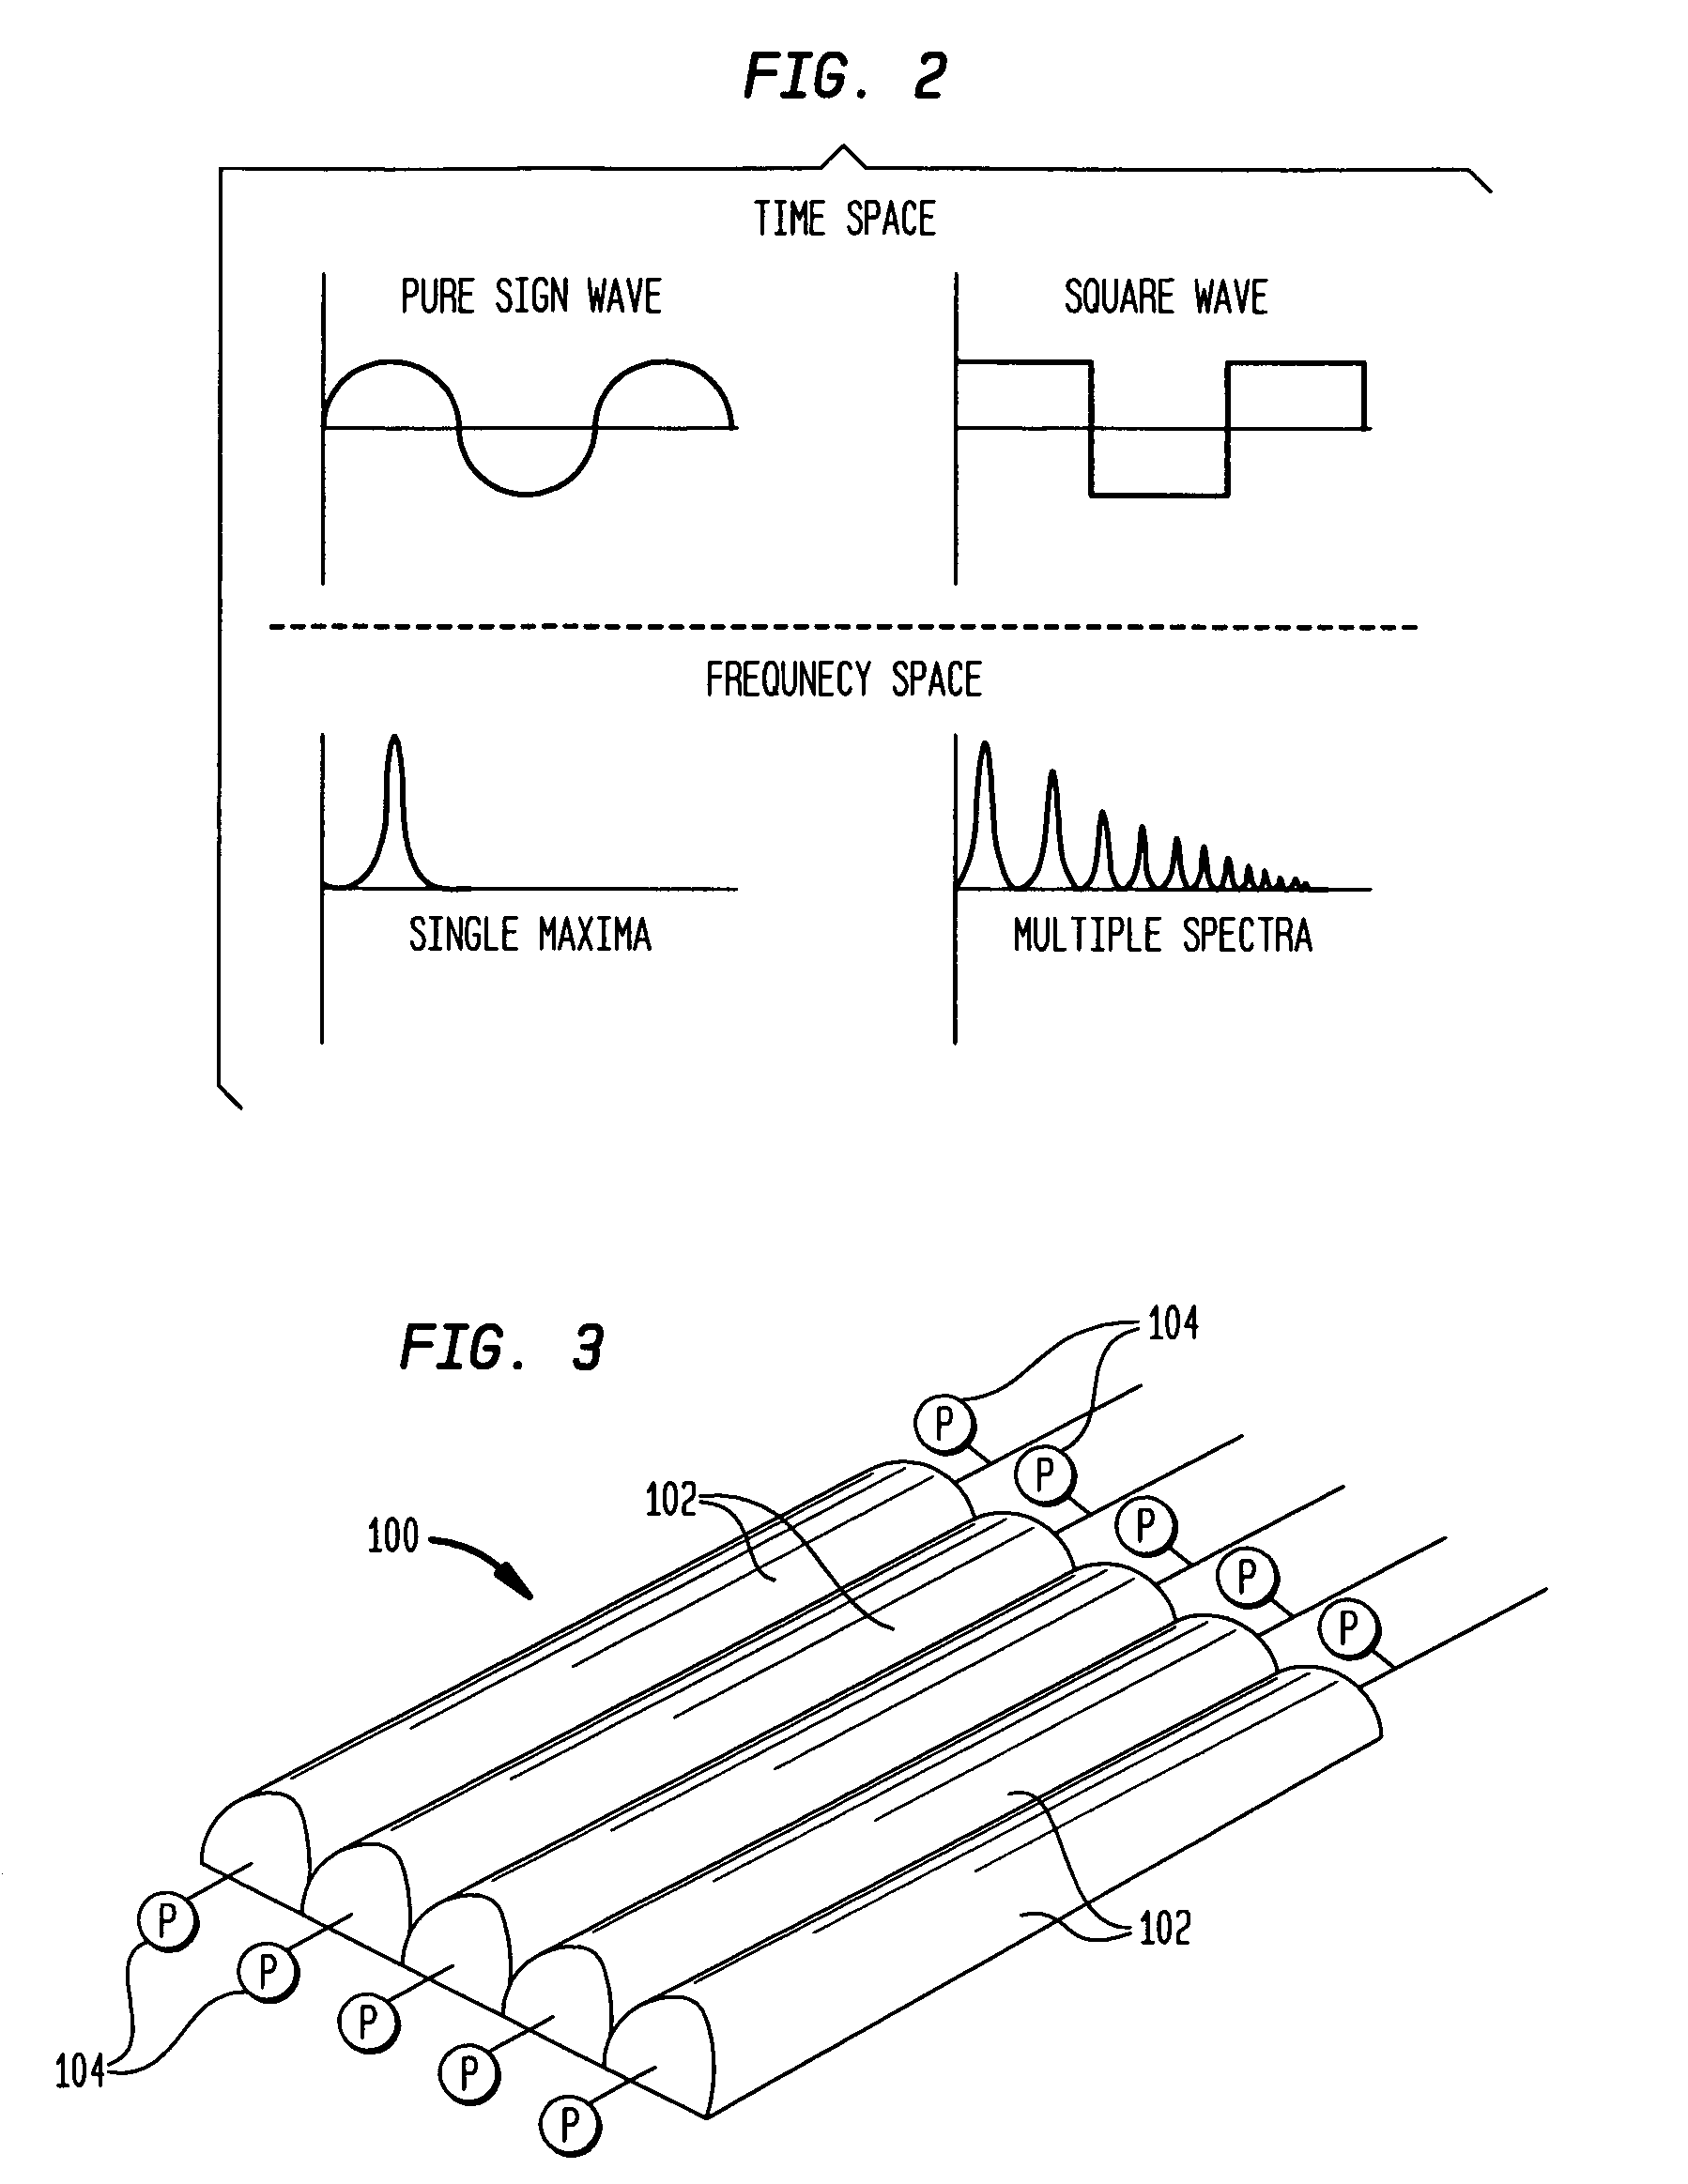 Adjustable pneumatic supporting surface